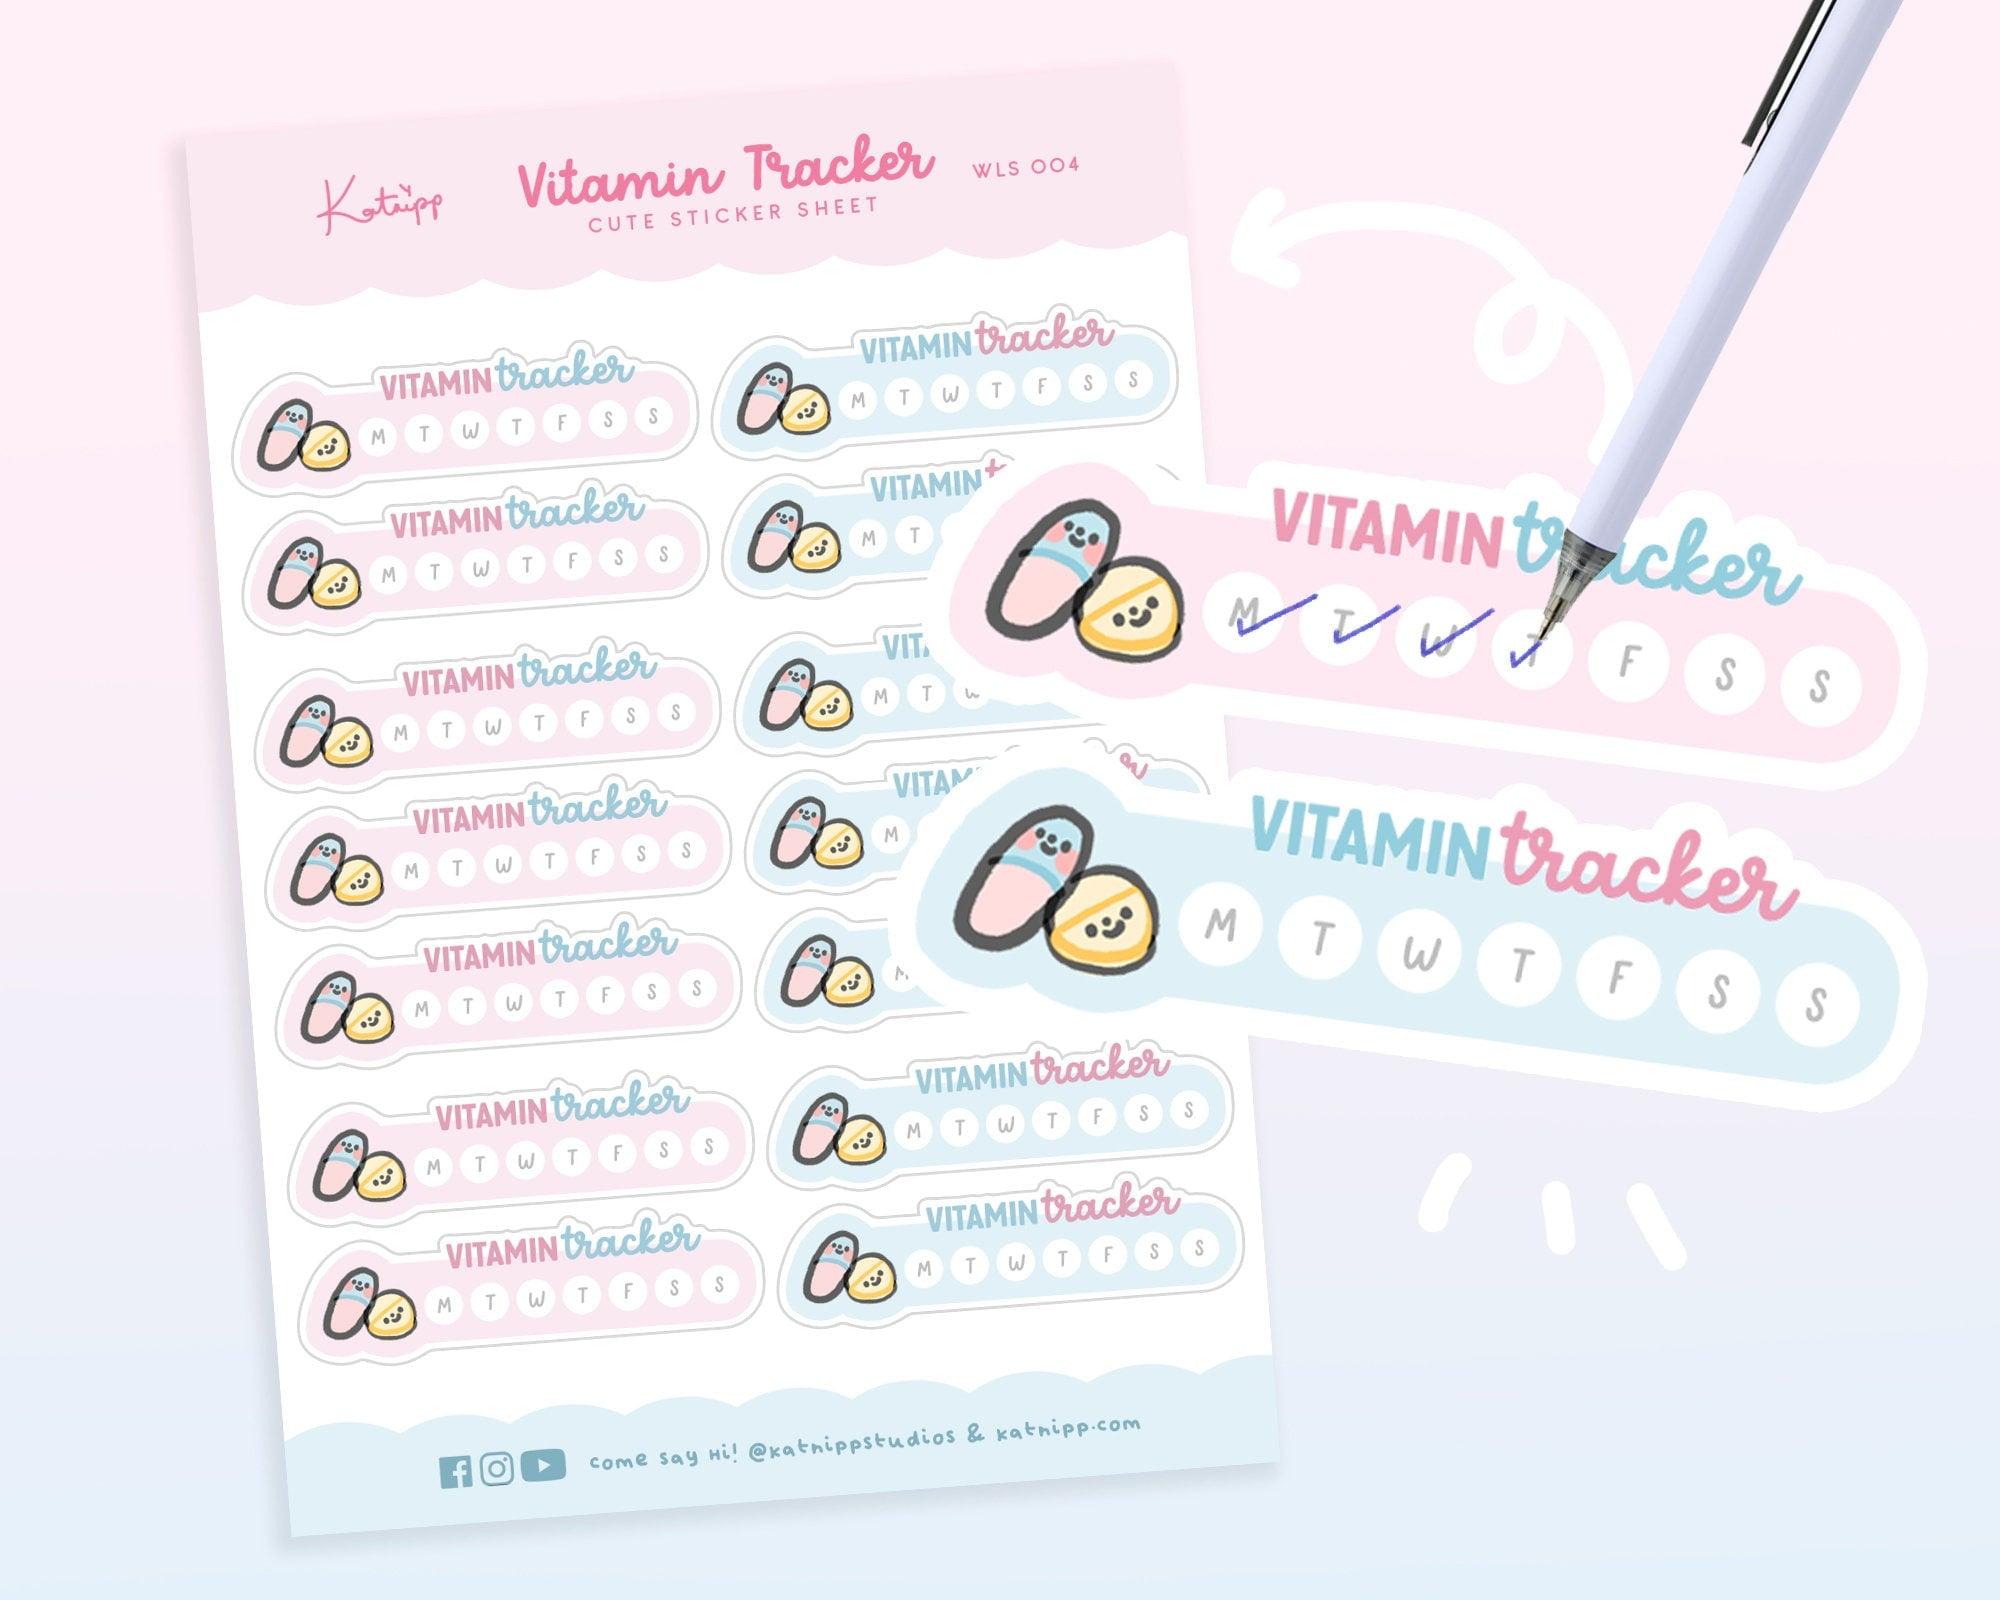 Adorable pastel planner stickers for tracking vitamin doses like D and B12. Hand-illustrated for charm and organisation, main 